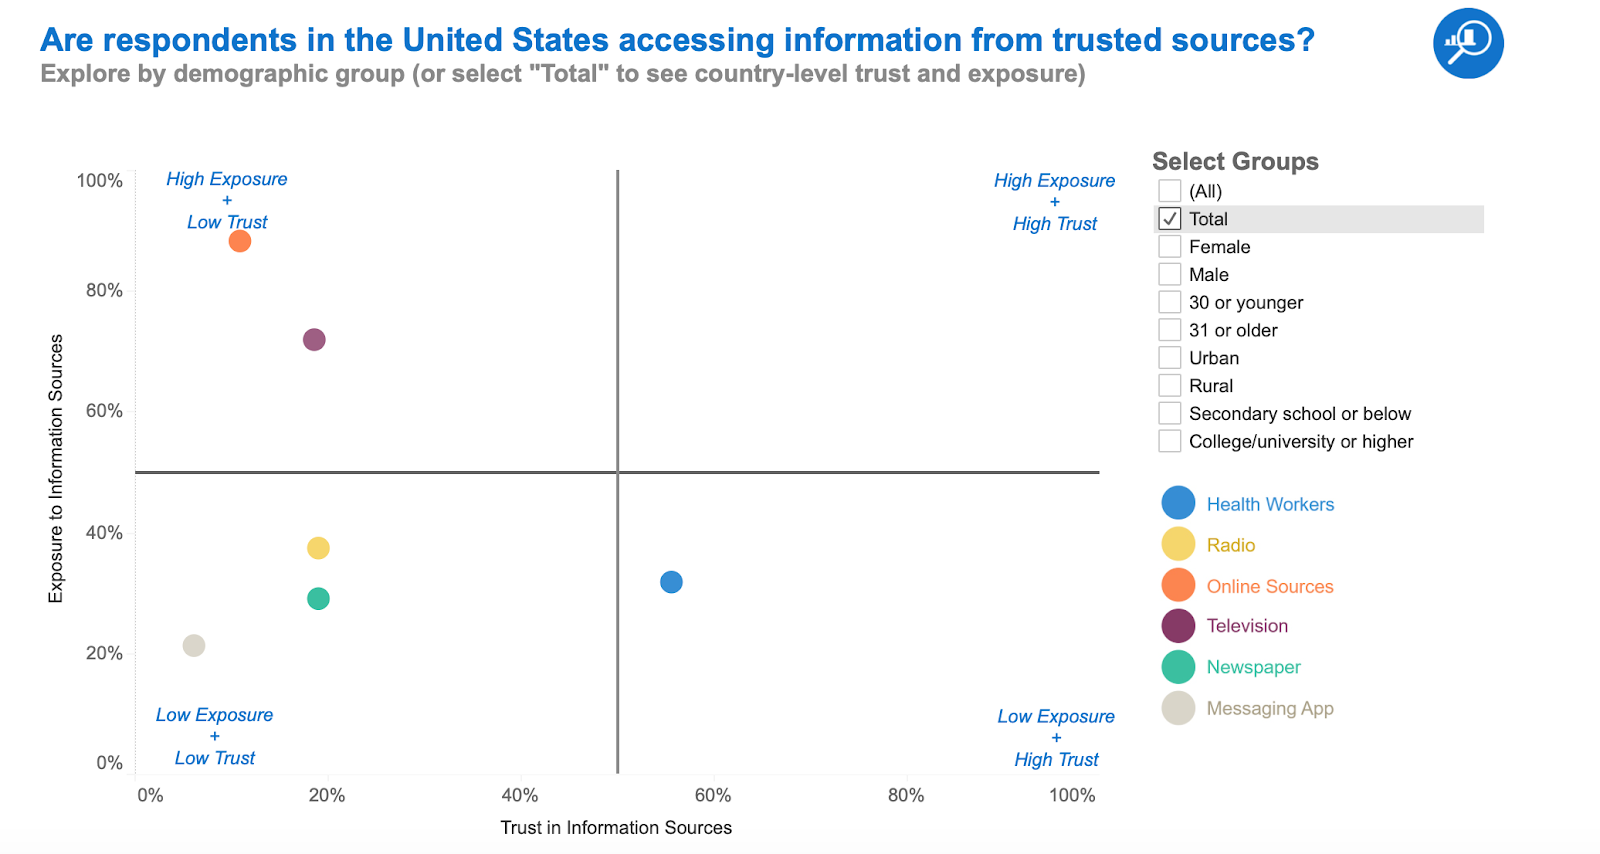 Are respondents in the United States accessing information from trusted sources?